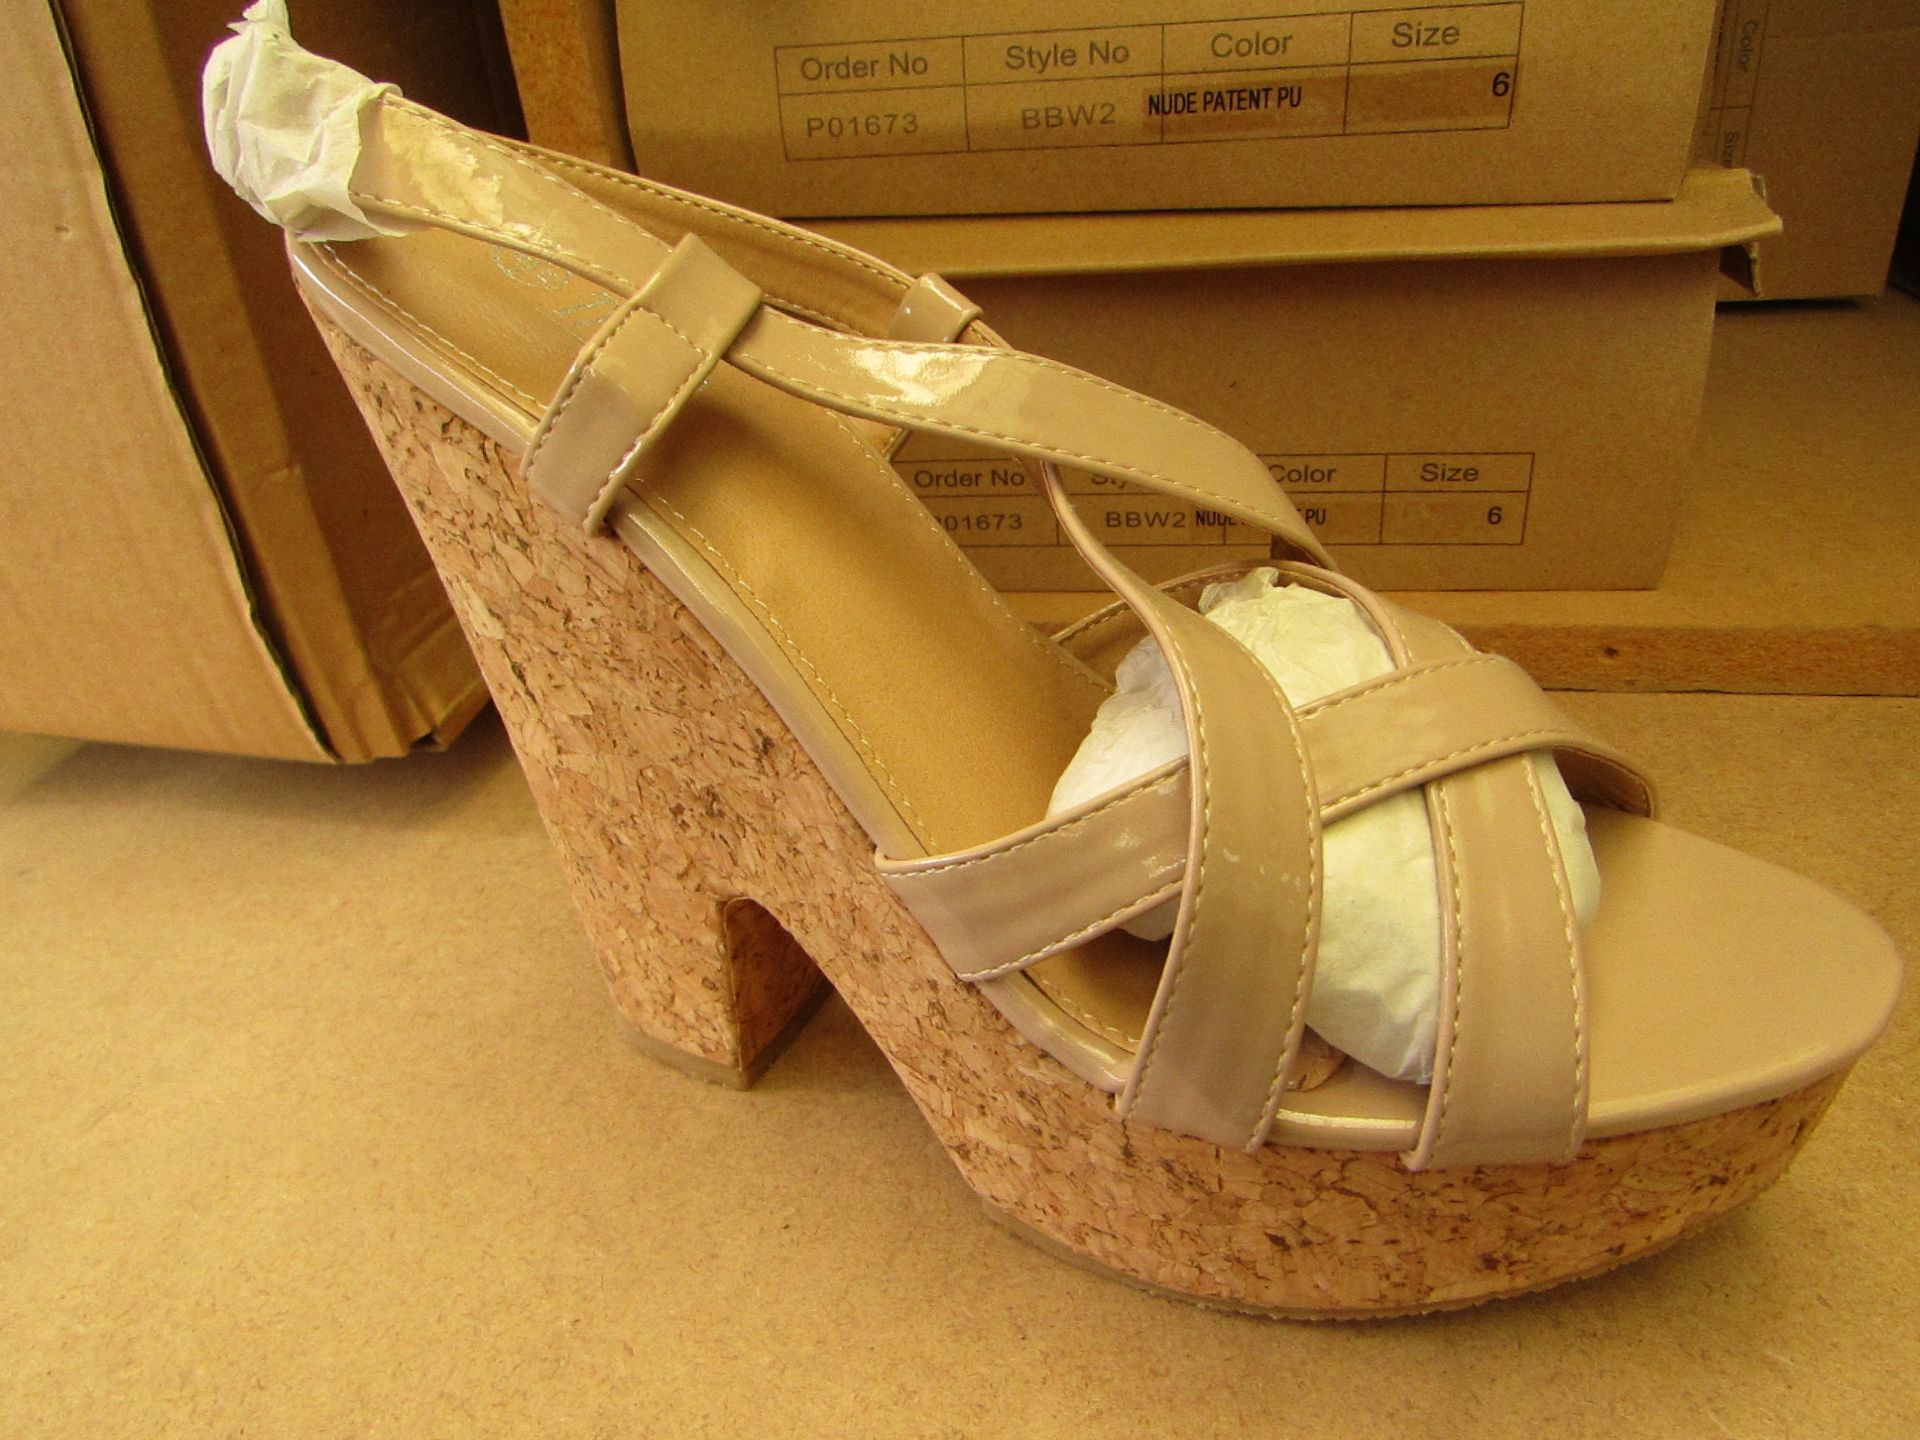 Truffle Nude Patent Platform Shoes size 6 new & boxed